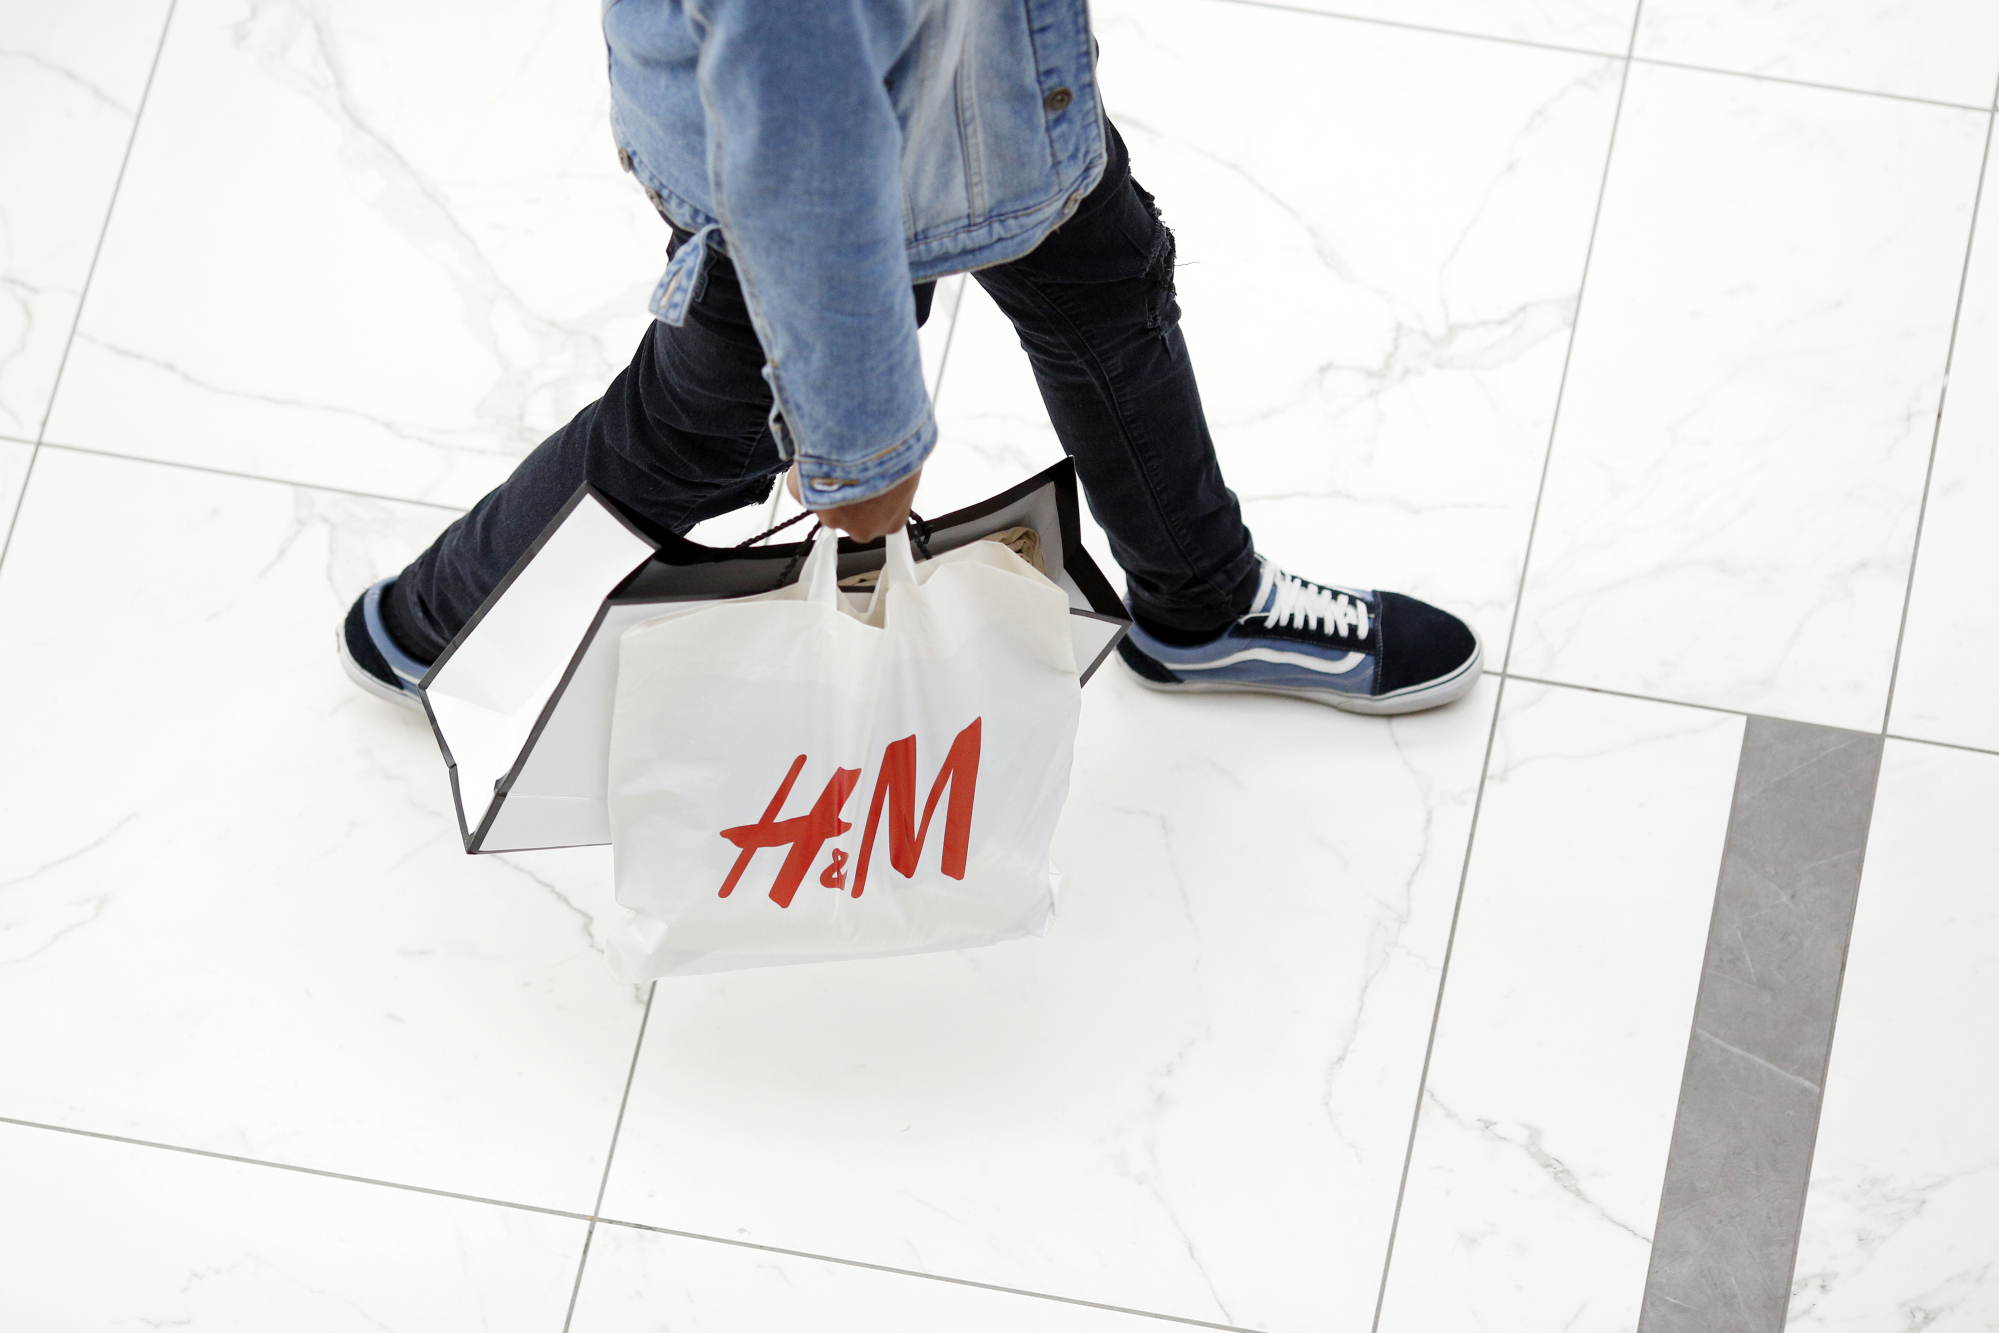 H&M Apologizes After Using Black Child in 'Monkey' Hoodie Ad - Bloomberg